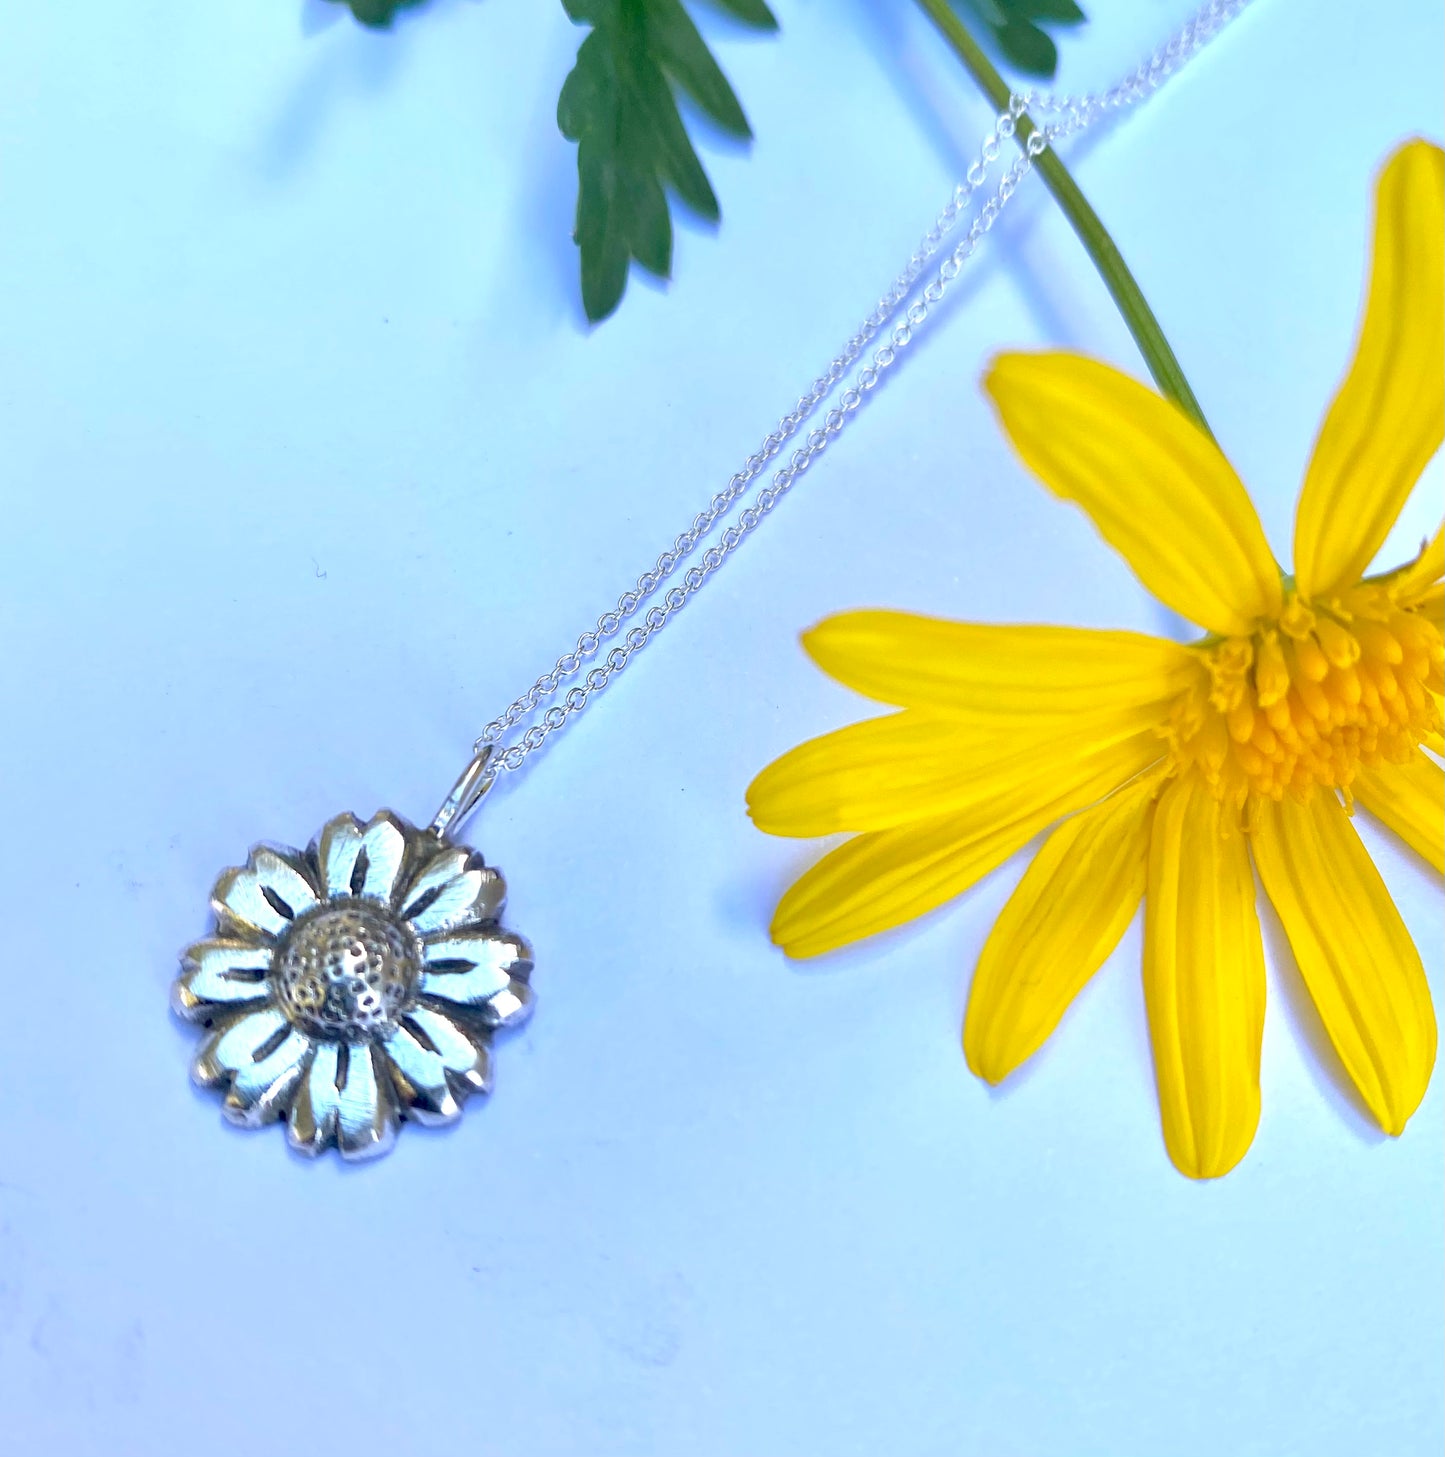 Oxidized silver Daisy Flower pendant with enhanced textures, contrasted with vibrant daisy petals.